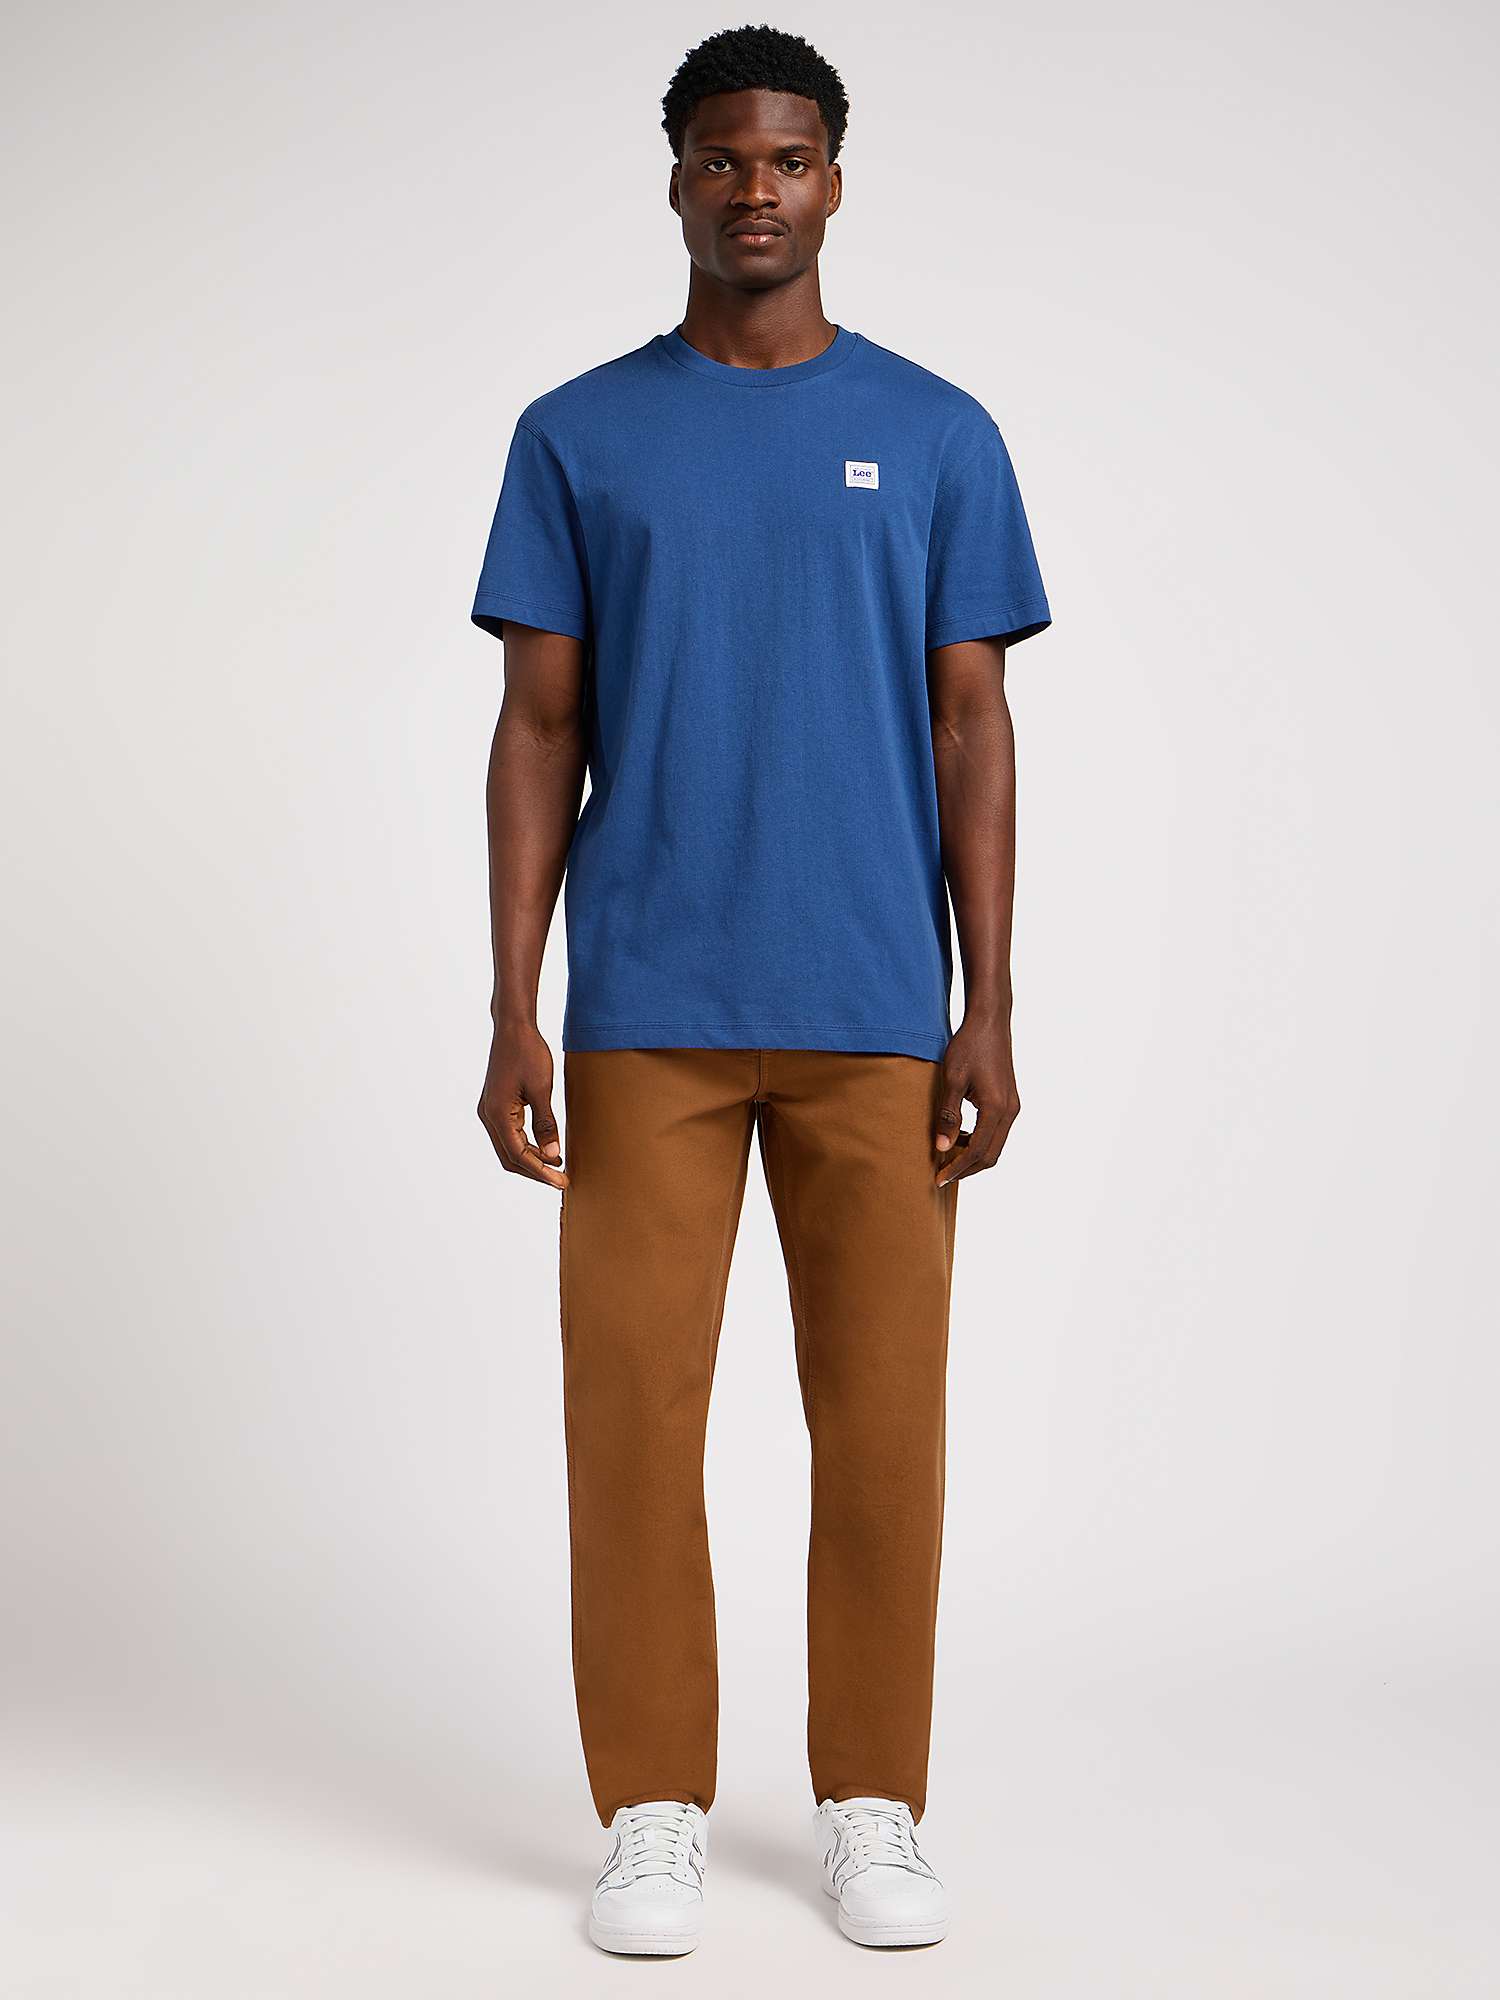 Buy Lee Carpenter Relaxed Fit Trousers, Brown Online at johnlewis.com